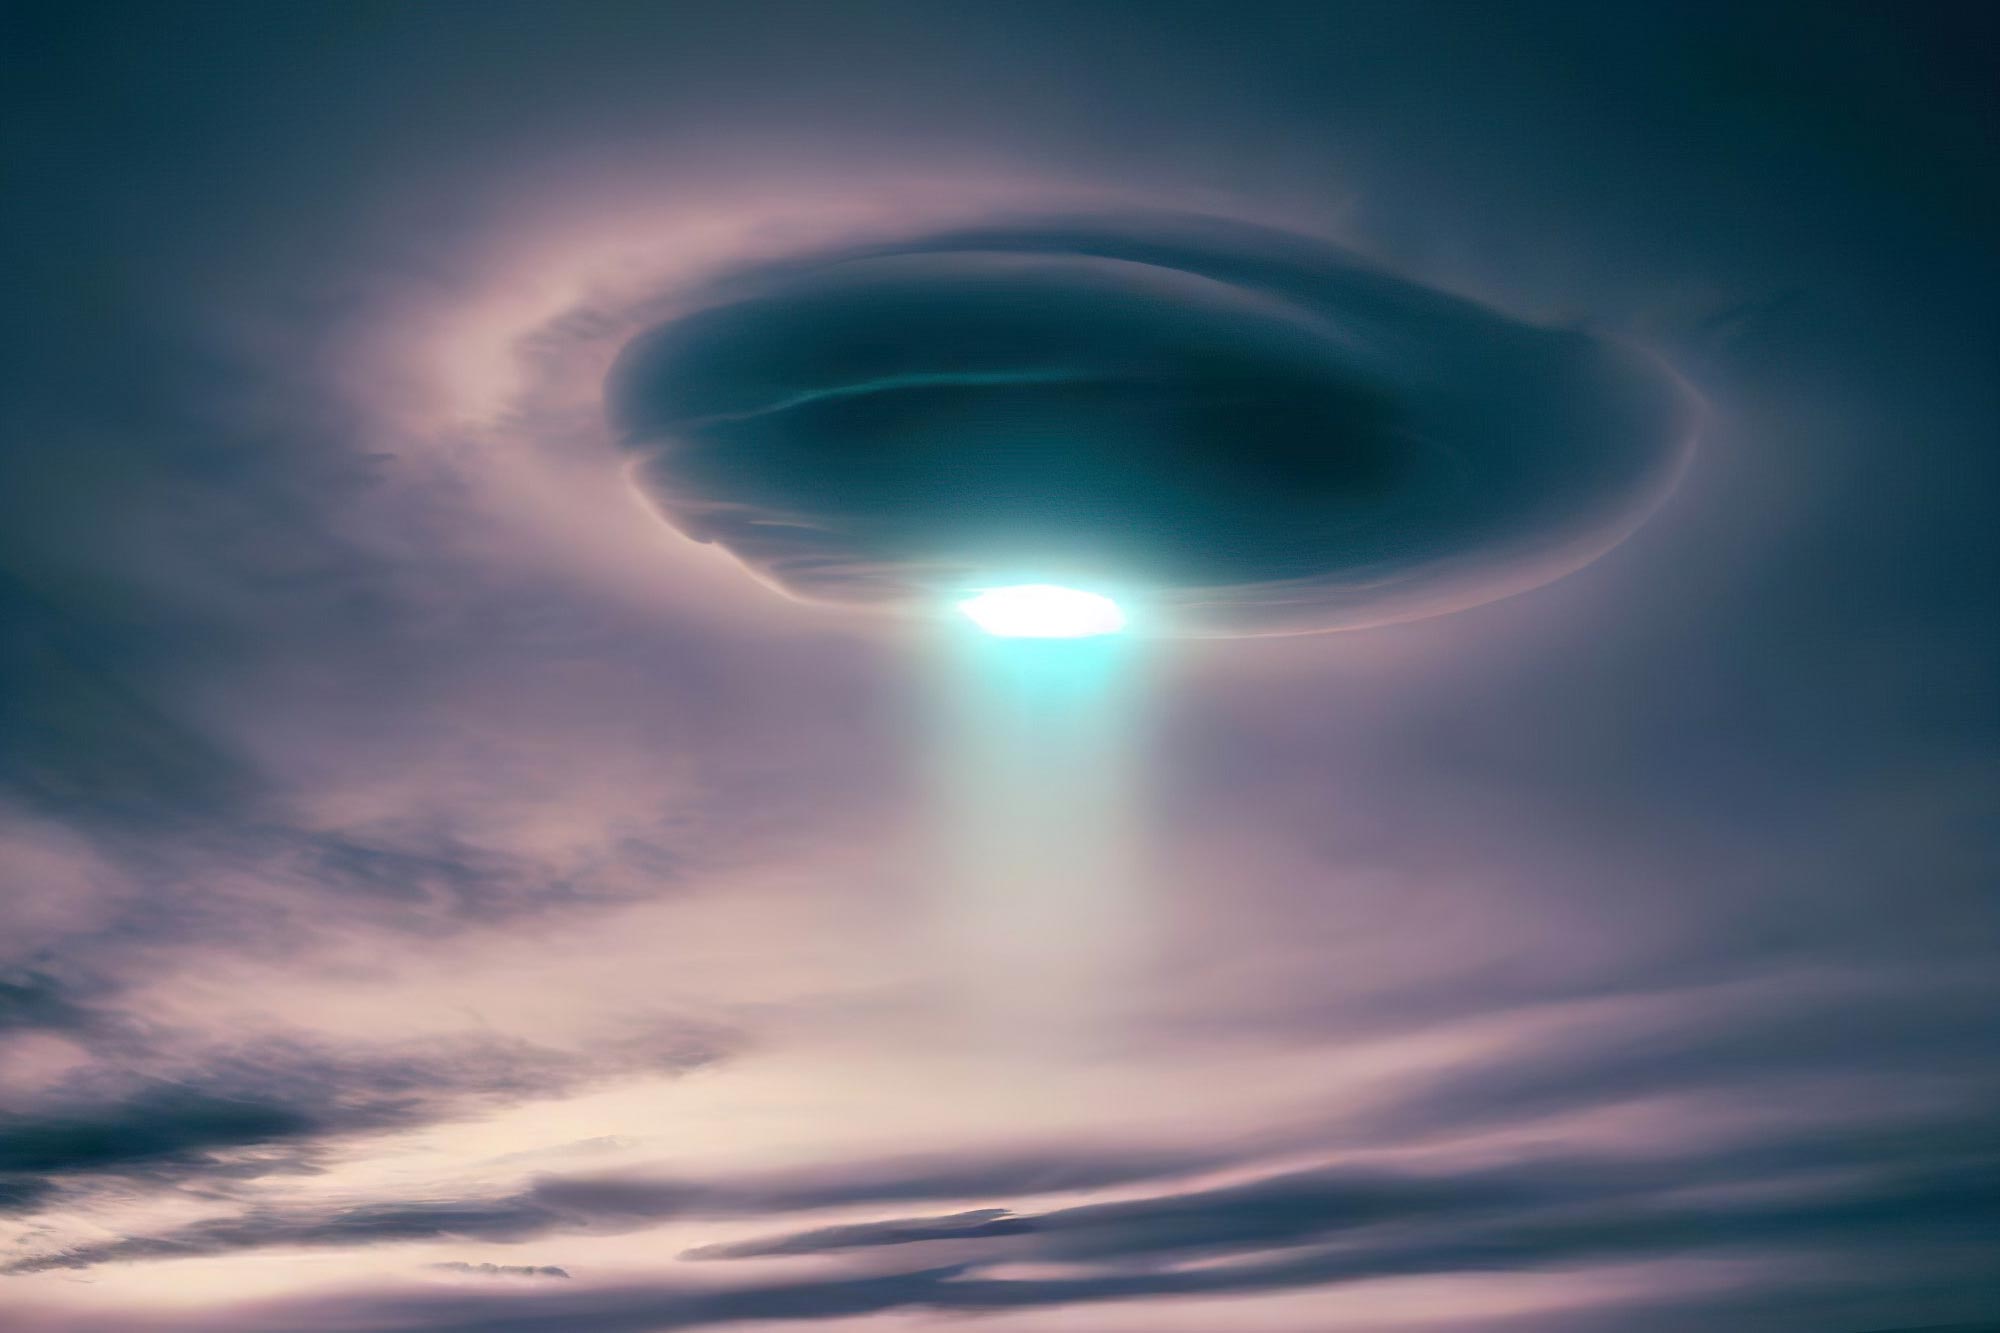 Unidentified Aerial Phenomena Observations Reported by 19% of Academic Survey Respondents - information technology news today - Technology - Public News Time